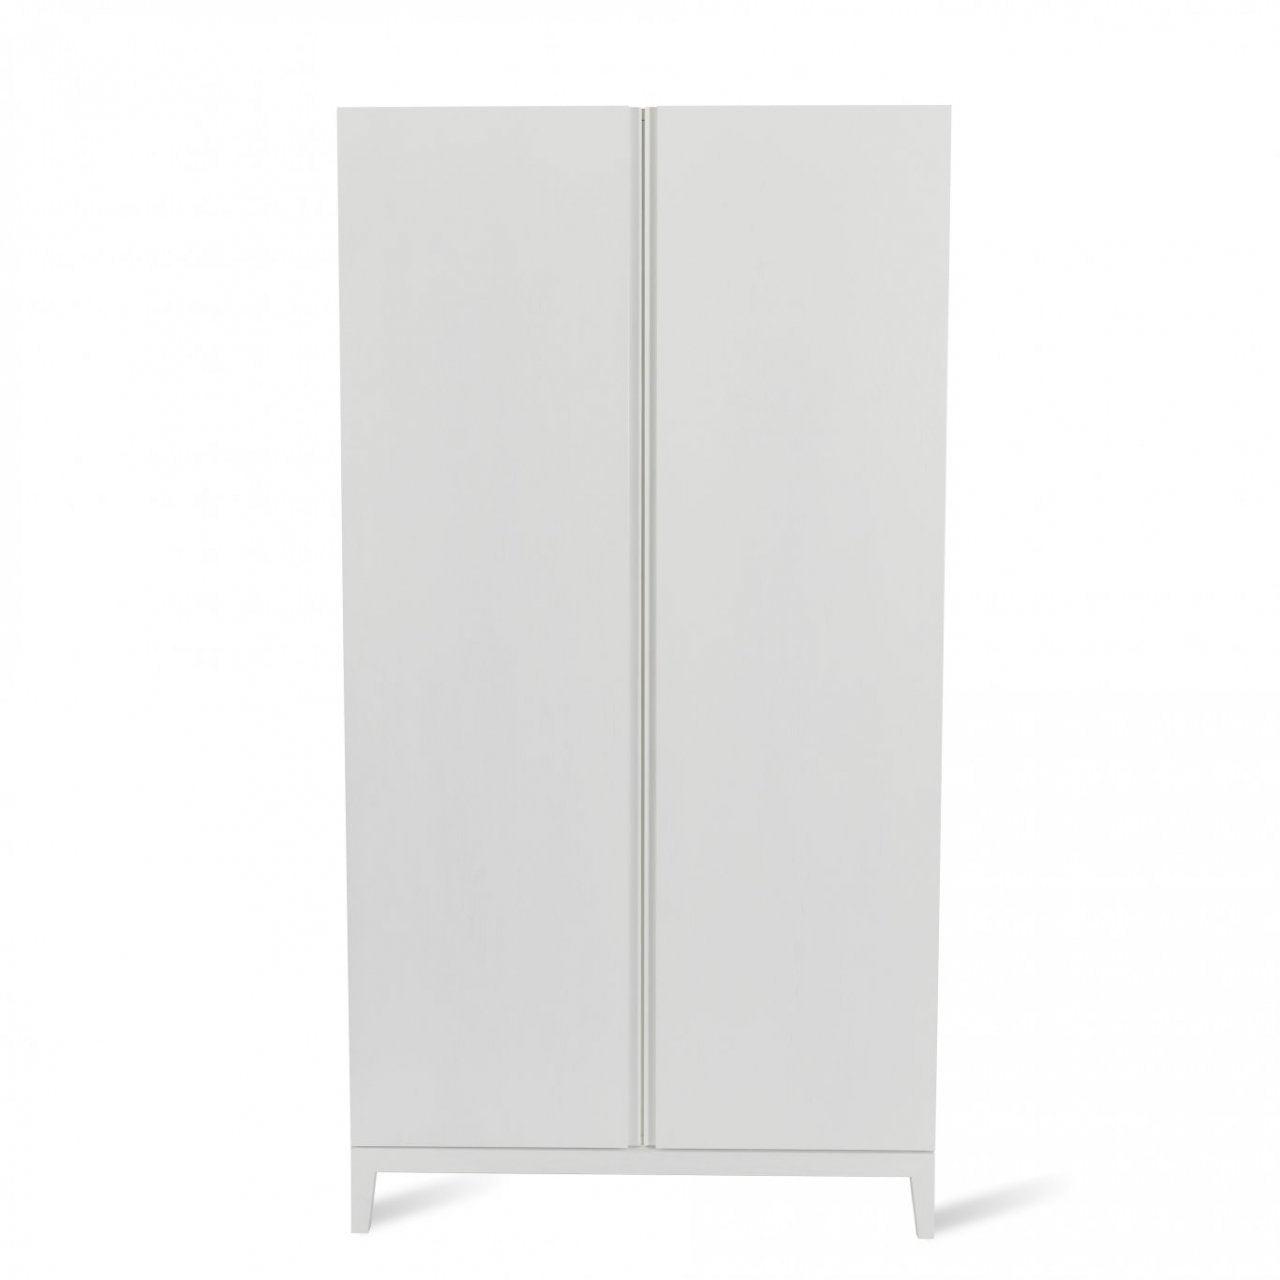 Orchid Wardrobe in Black or White